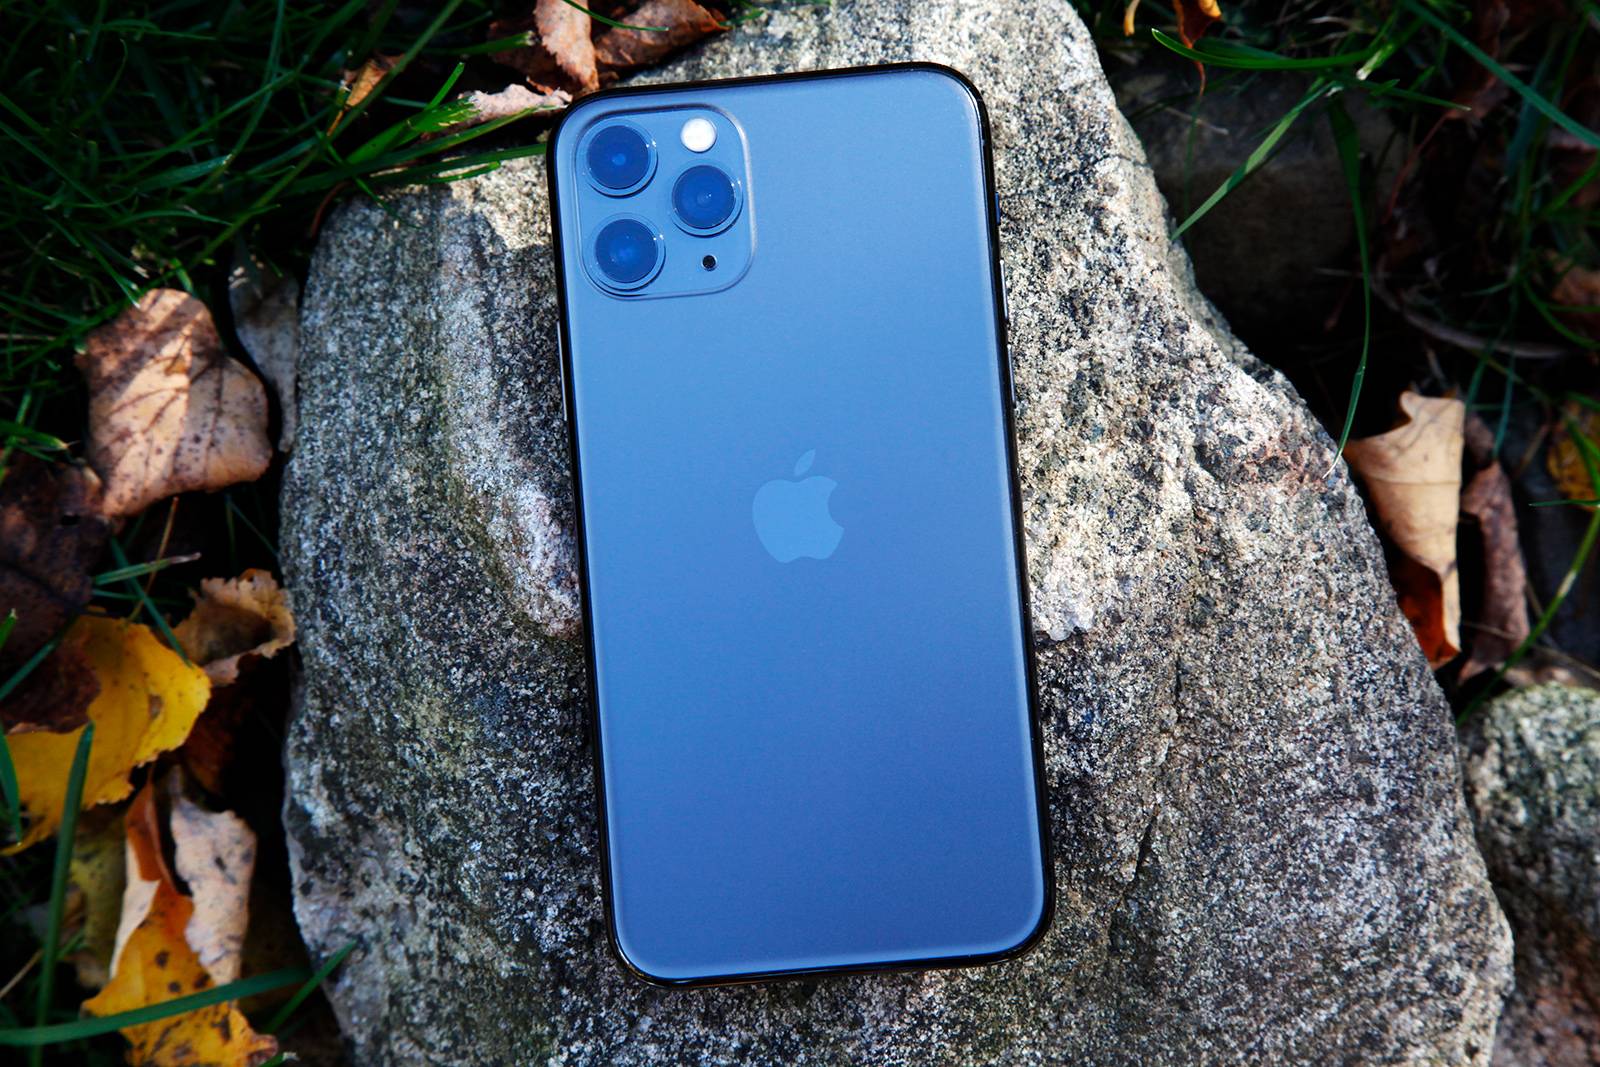 Right here’s why iPhone 11 owners would possibly unruffled rep iOS 14.5 as quickly they are going to